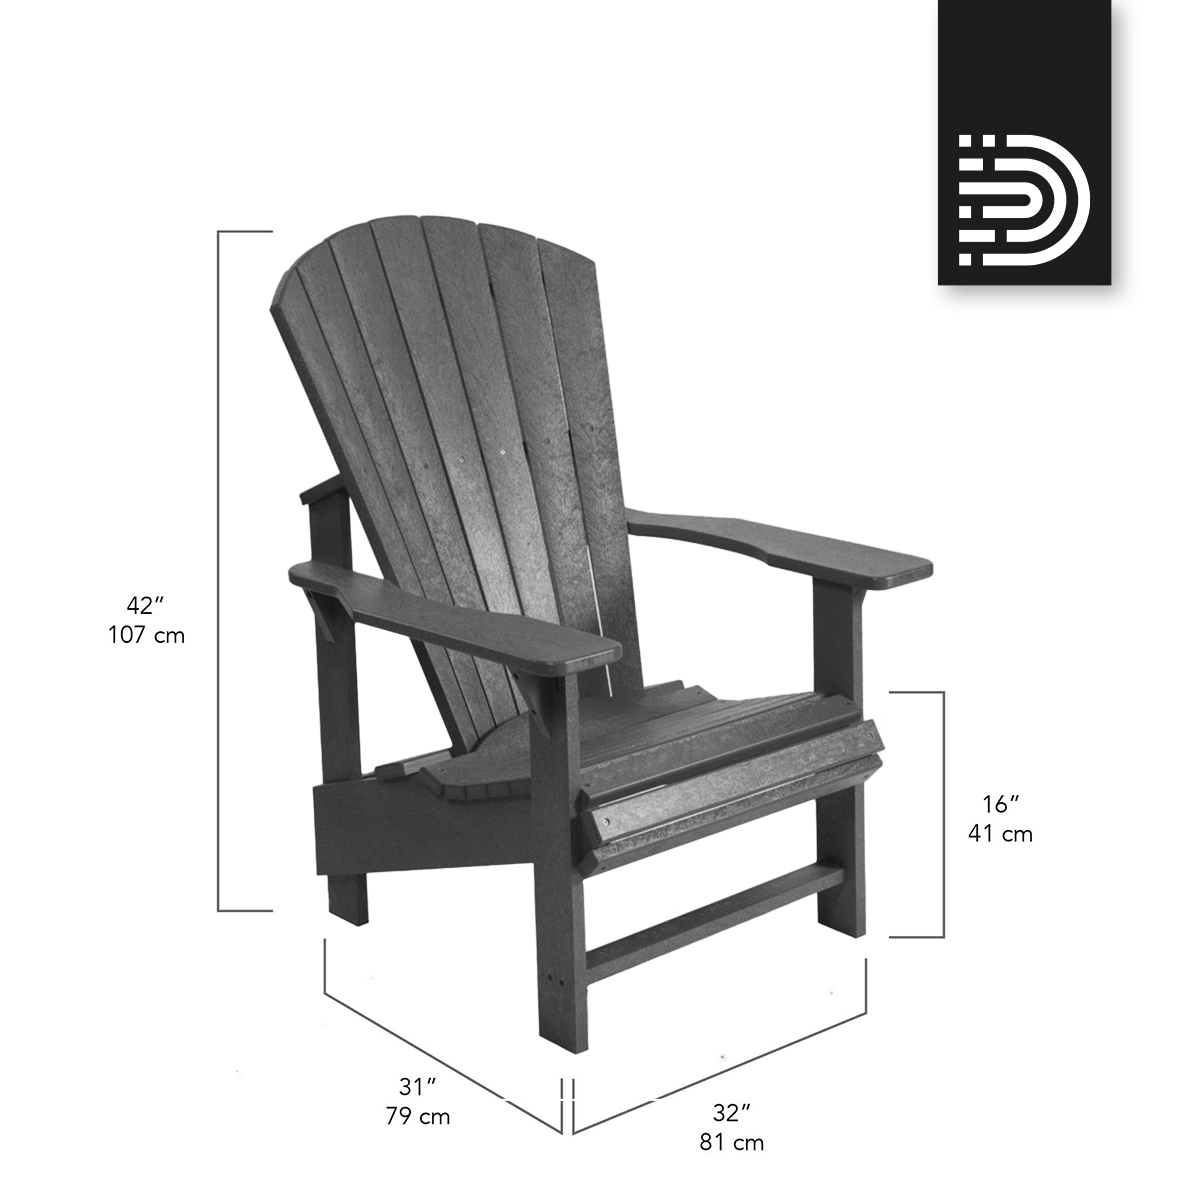 C03 Upright Adirondack Chair - Forest green -06